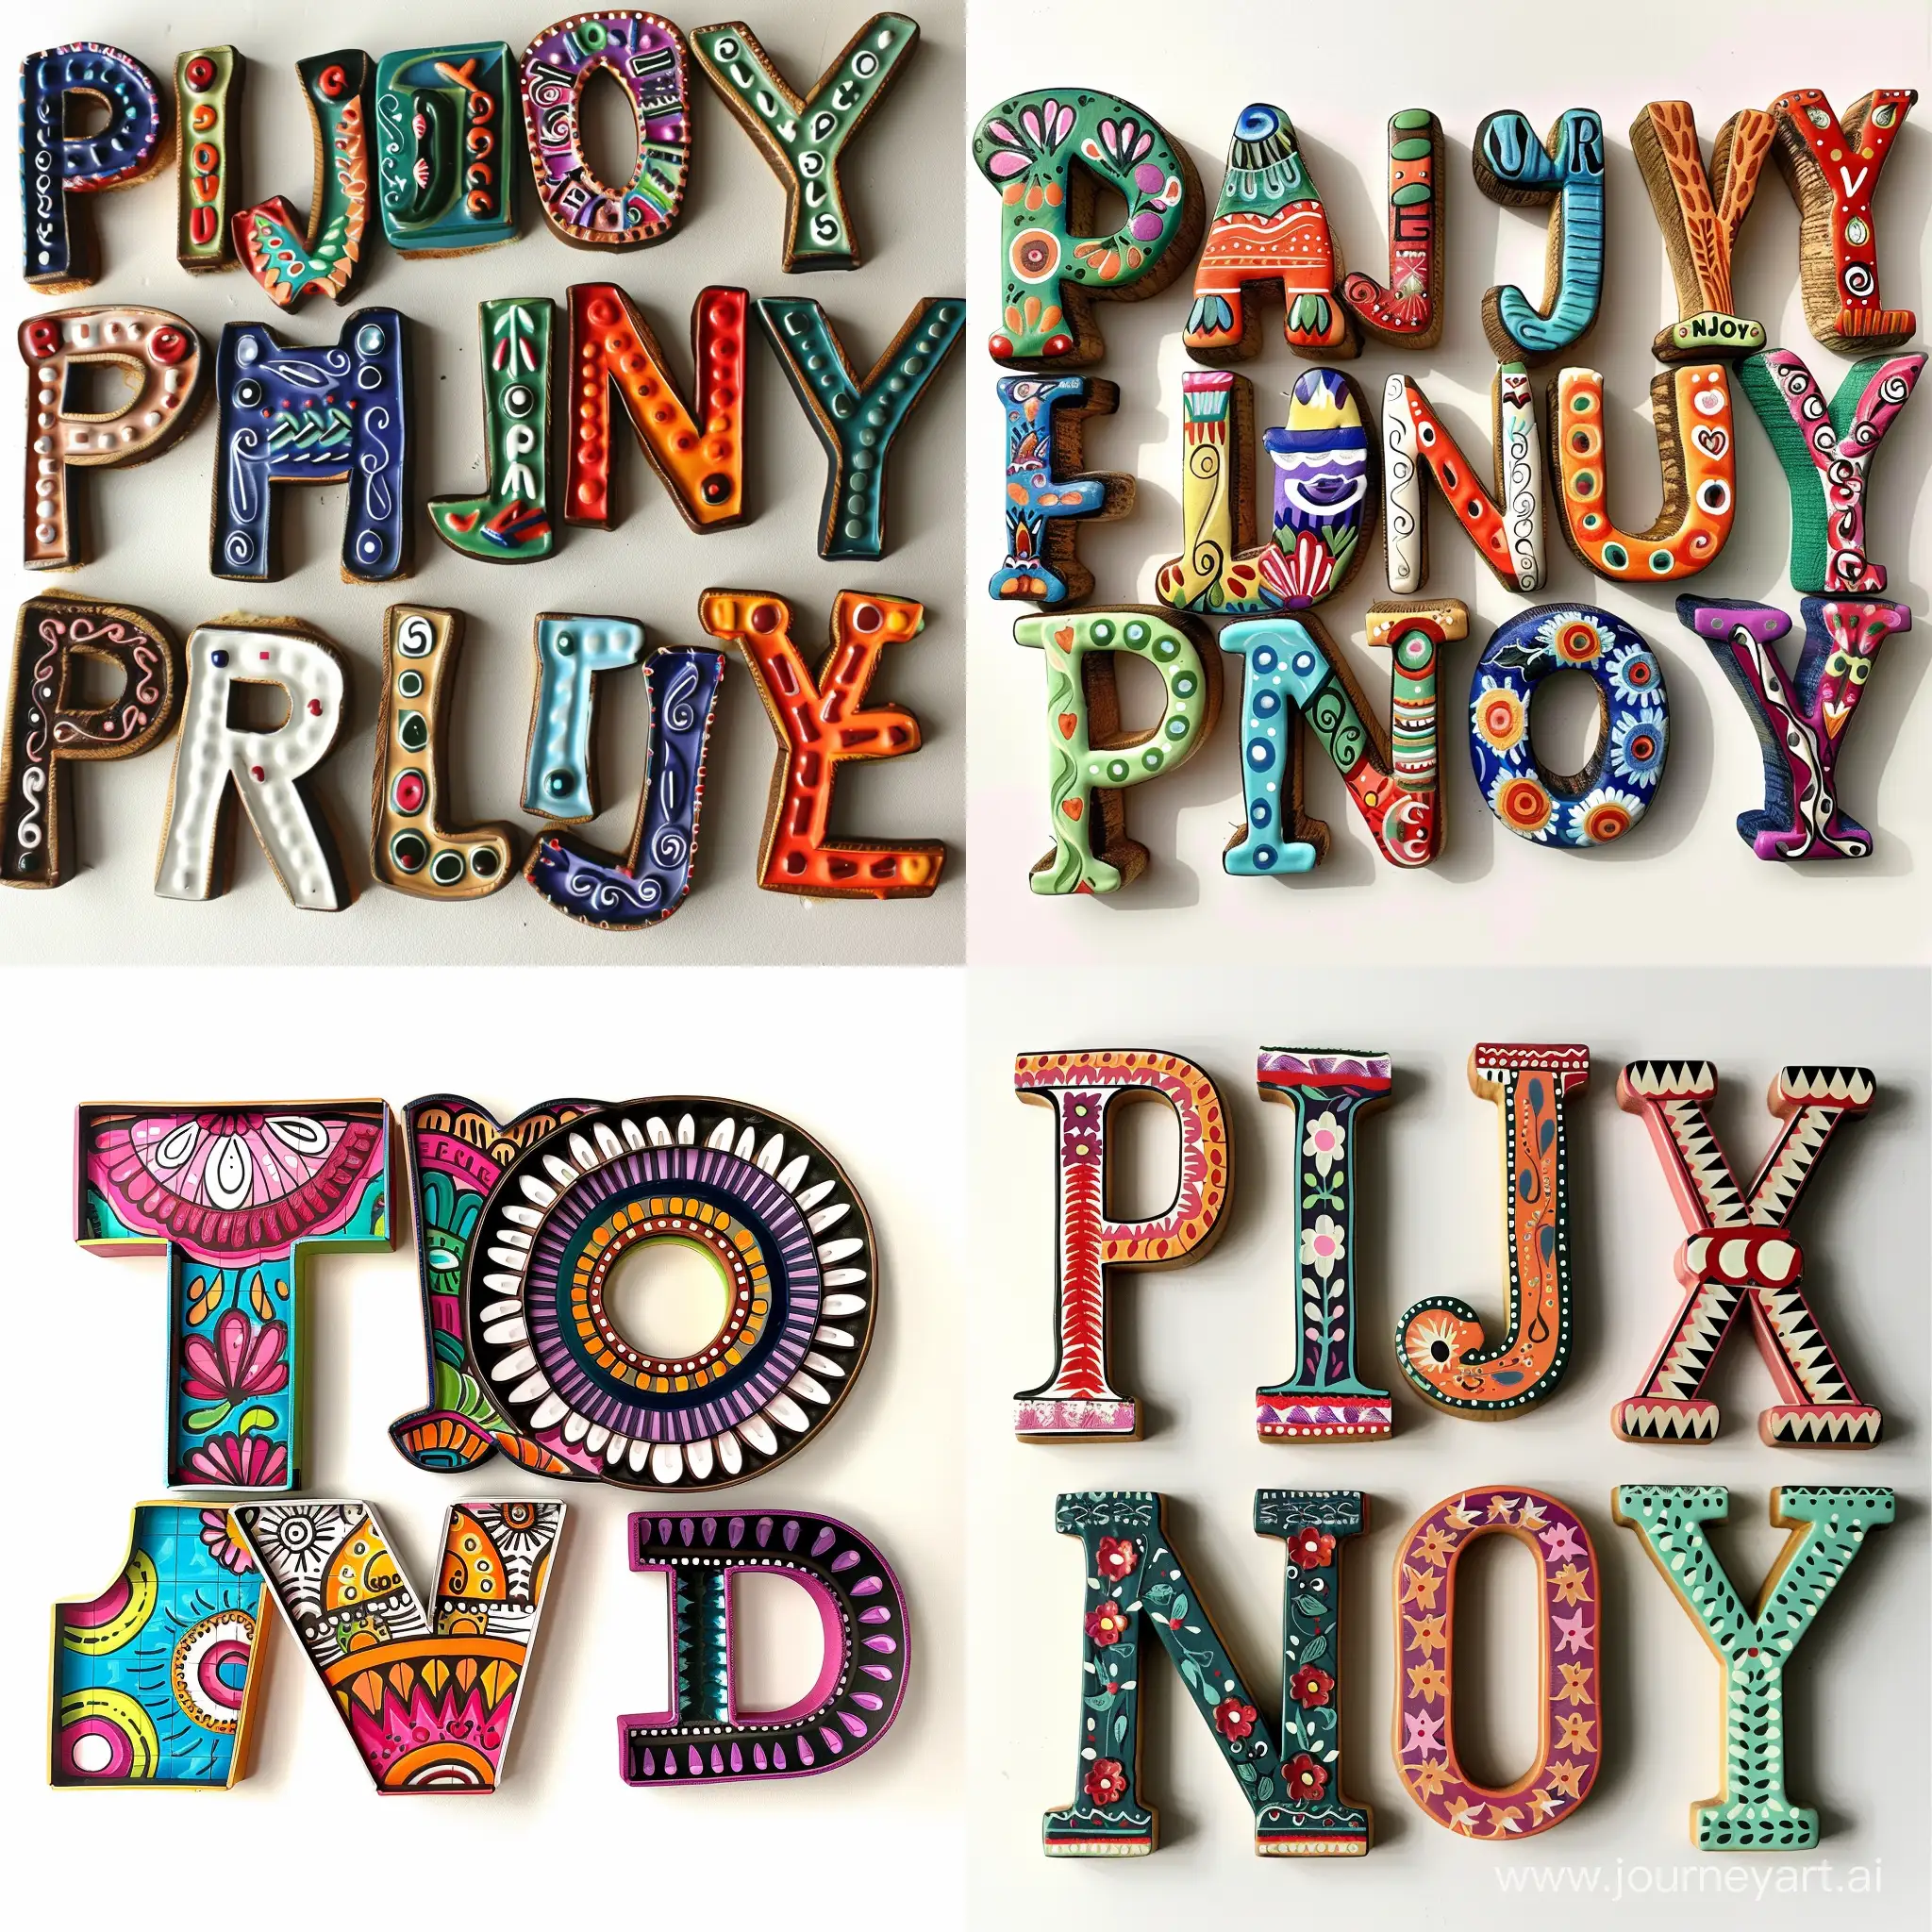 Colorful-Mexican-Style-Pinjoy-Letters-Displaying-Vibrant-Cultural-Artistry